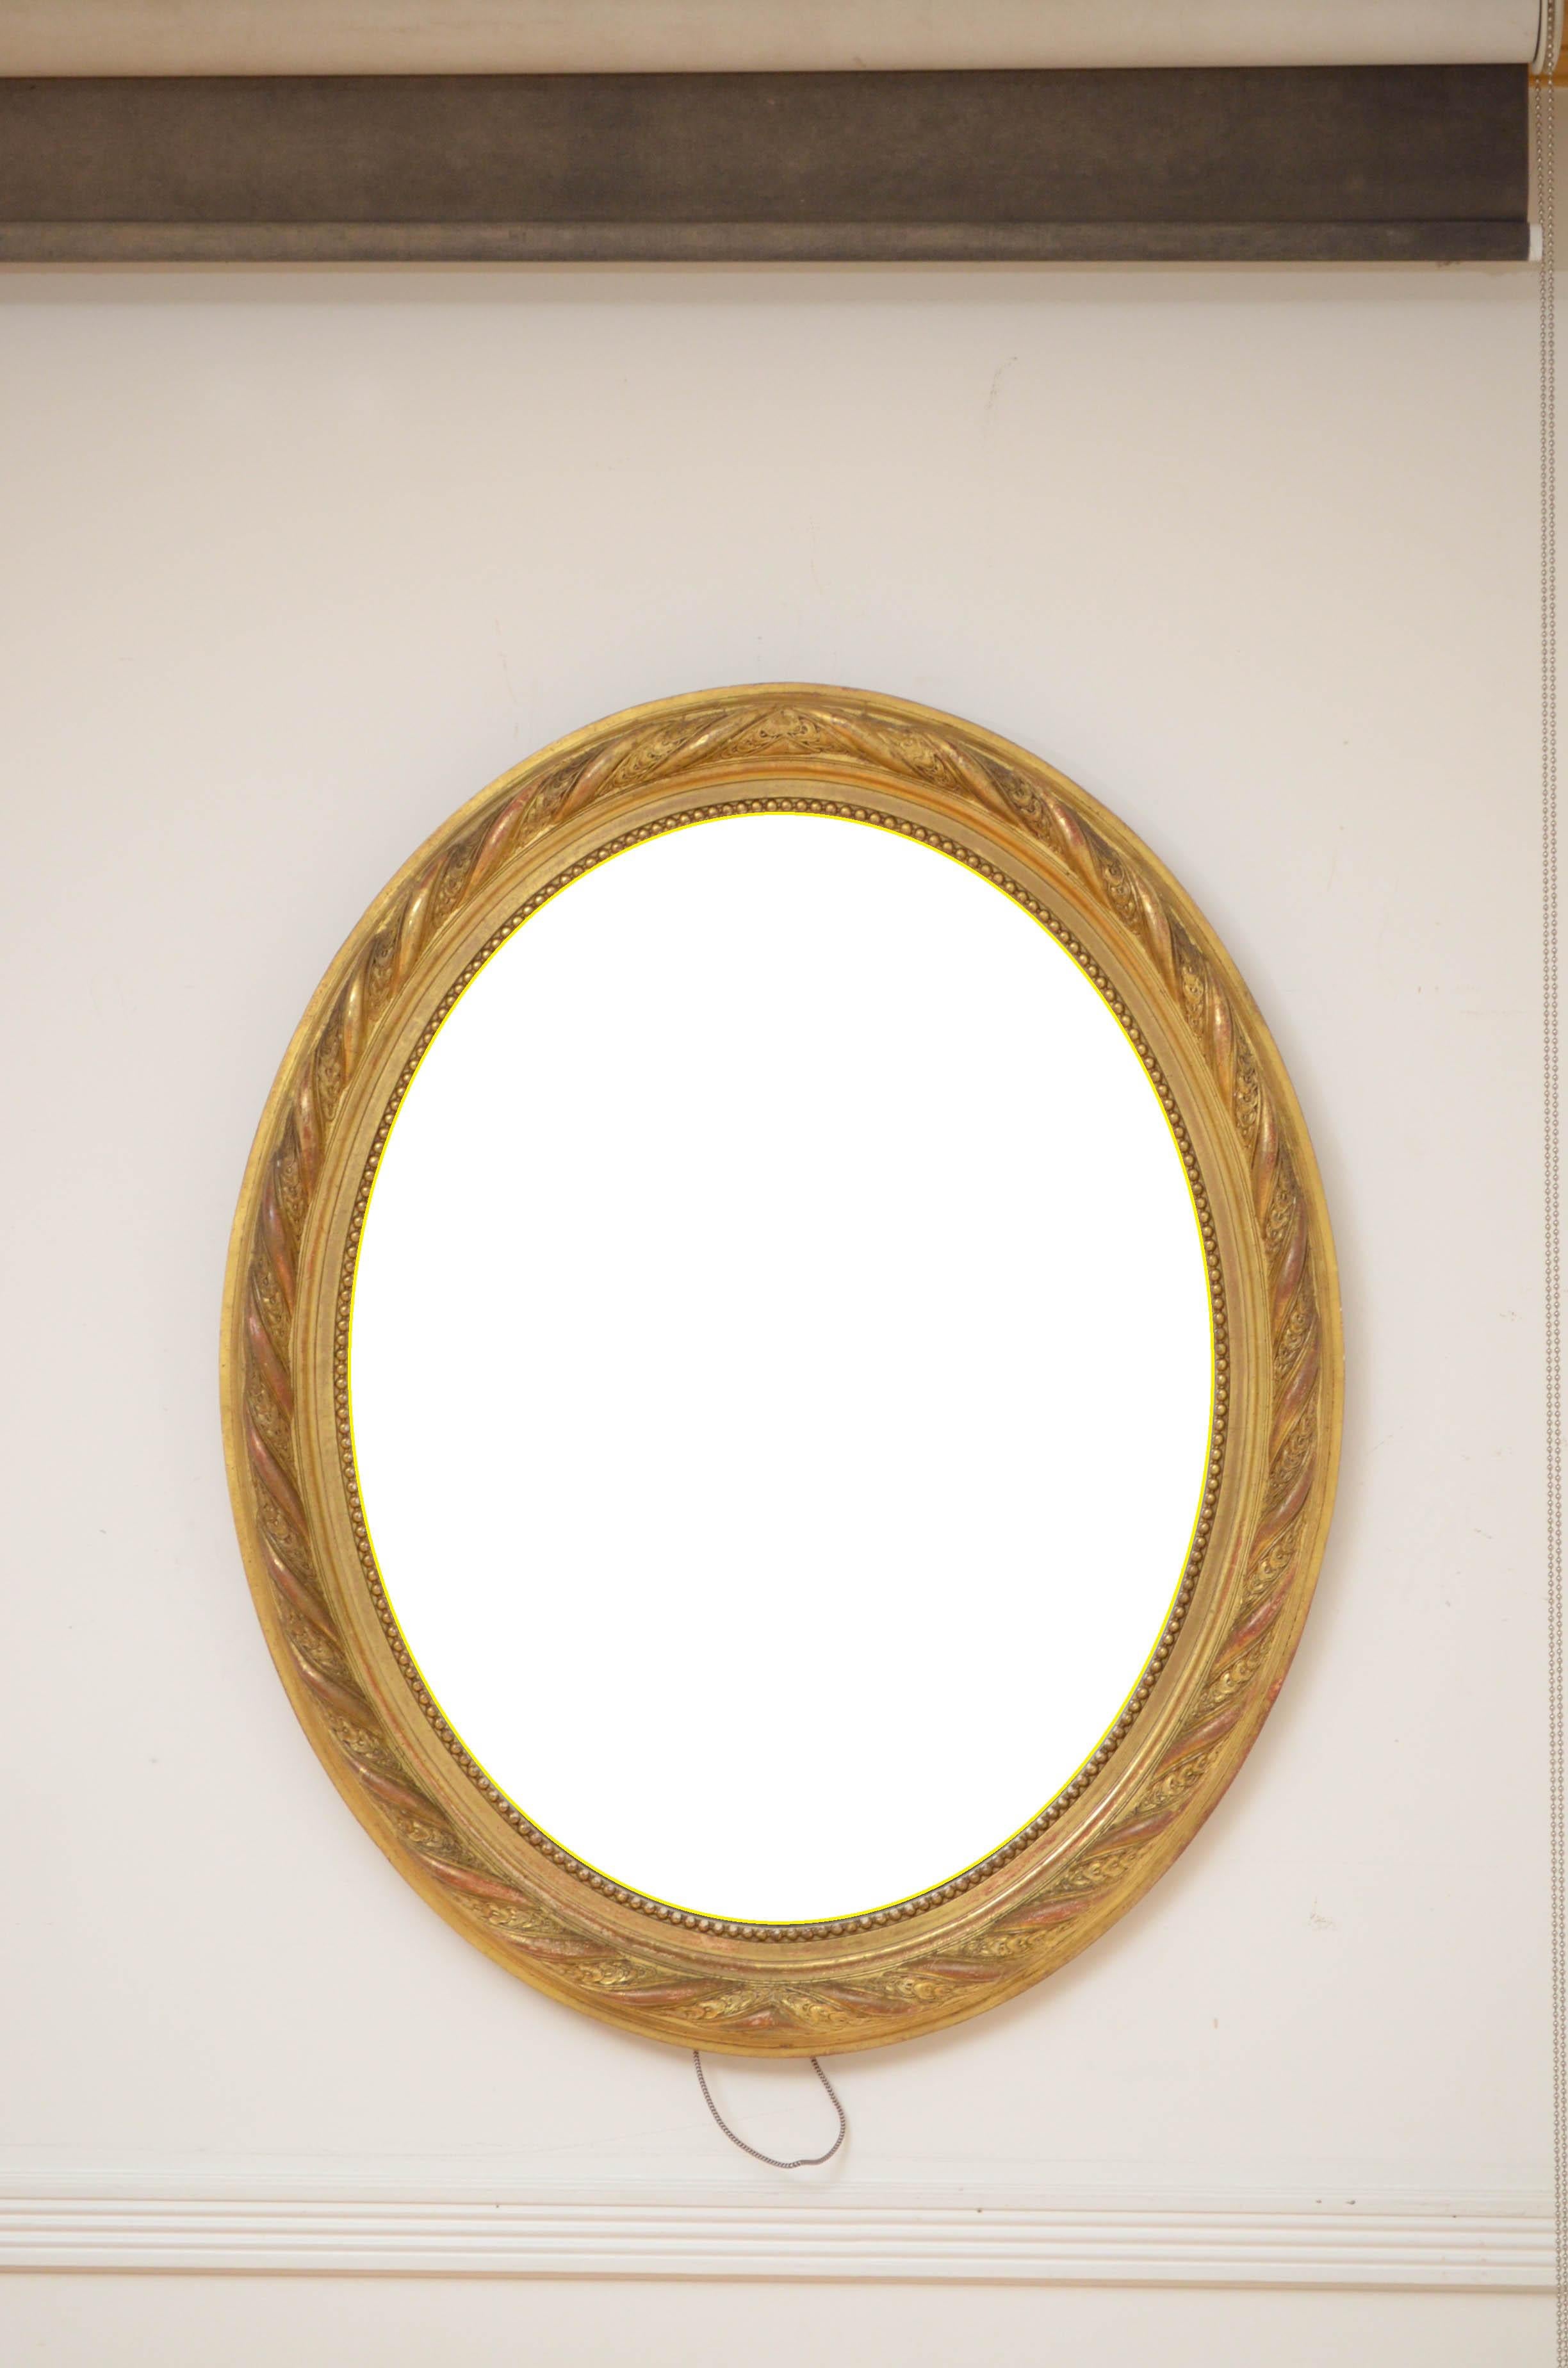 0583 Superb 19th century gilded wall mirror, having original bevelled edge glass with some foxing in beautifully carved and beaded giltwood frame. This antique mirror retains its original glass, original gilt and backboards, all in home ready